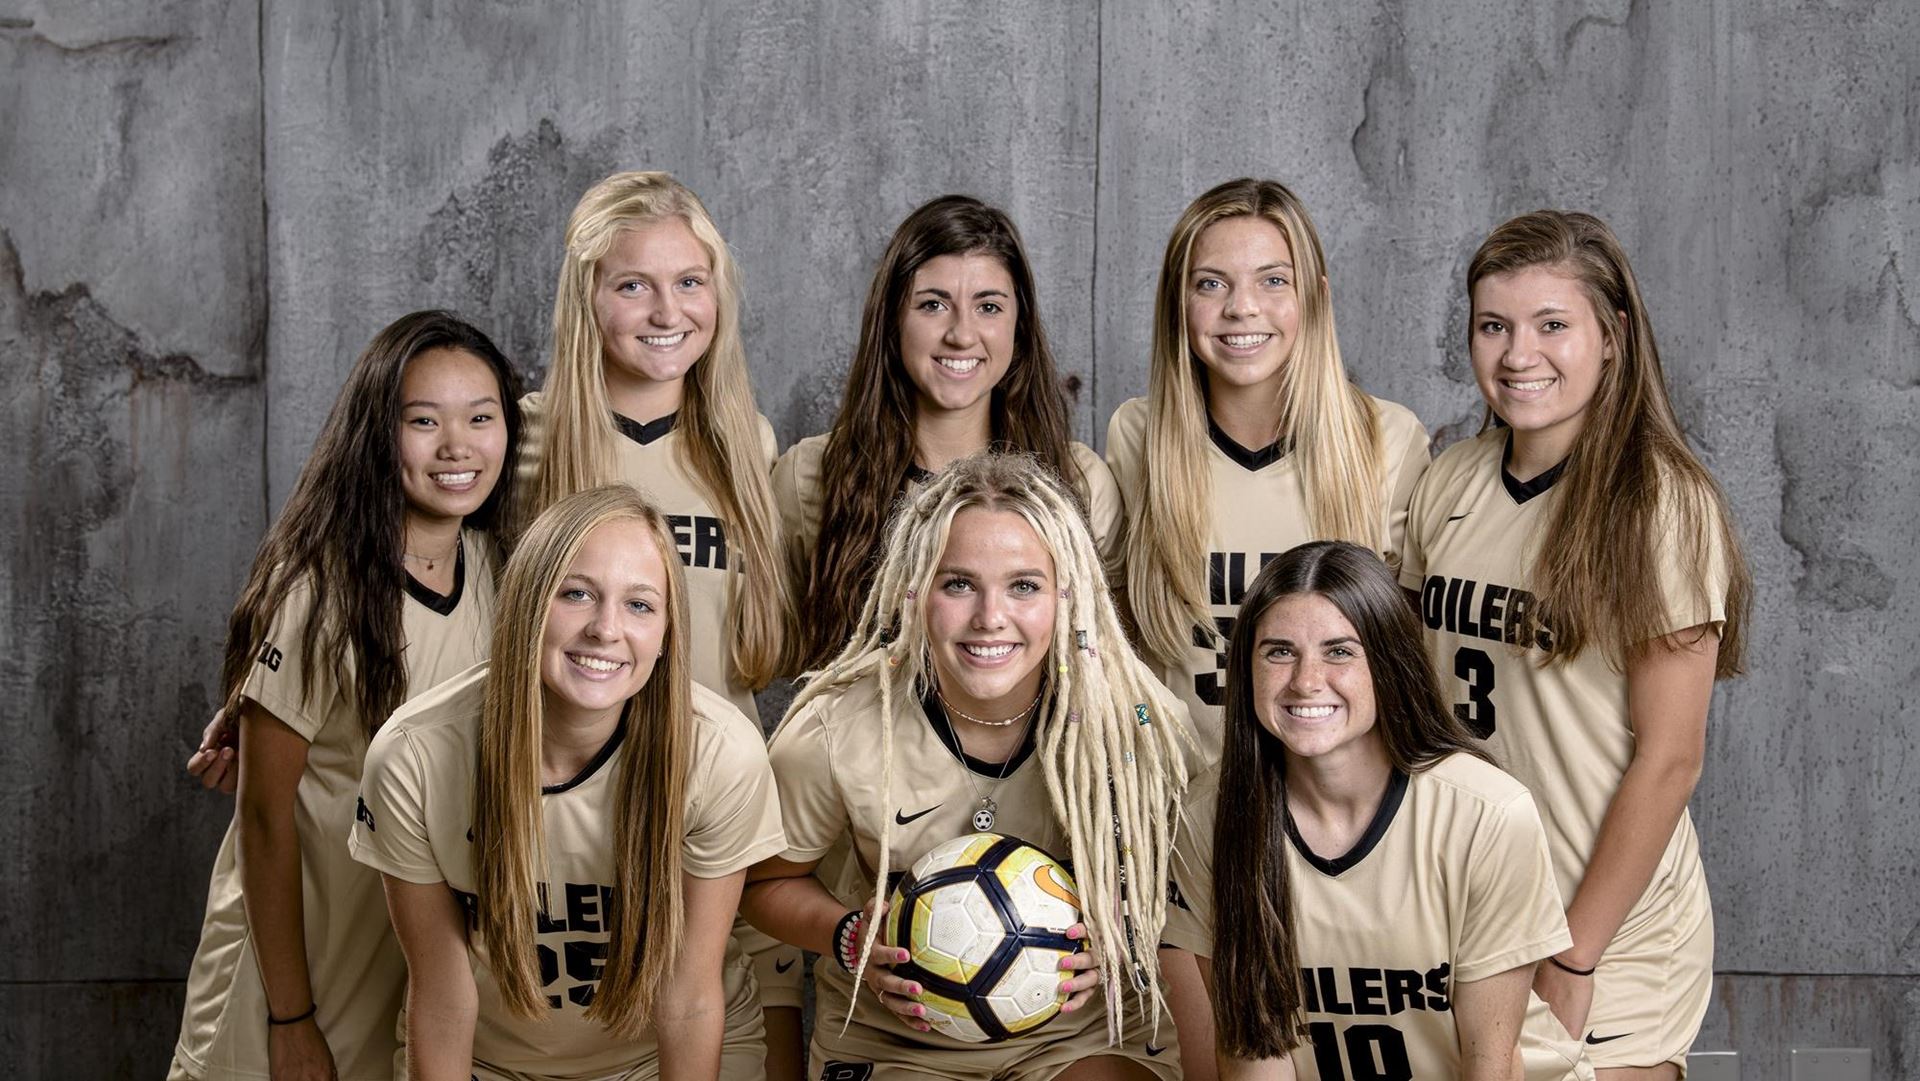 purdue-soccer-signs-8-class-of-2020-recruits-to-national-letters-of